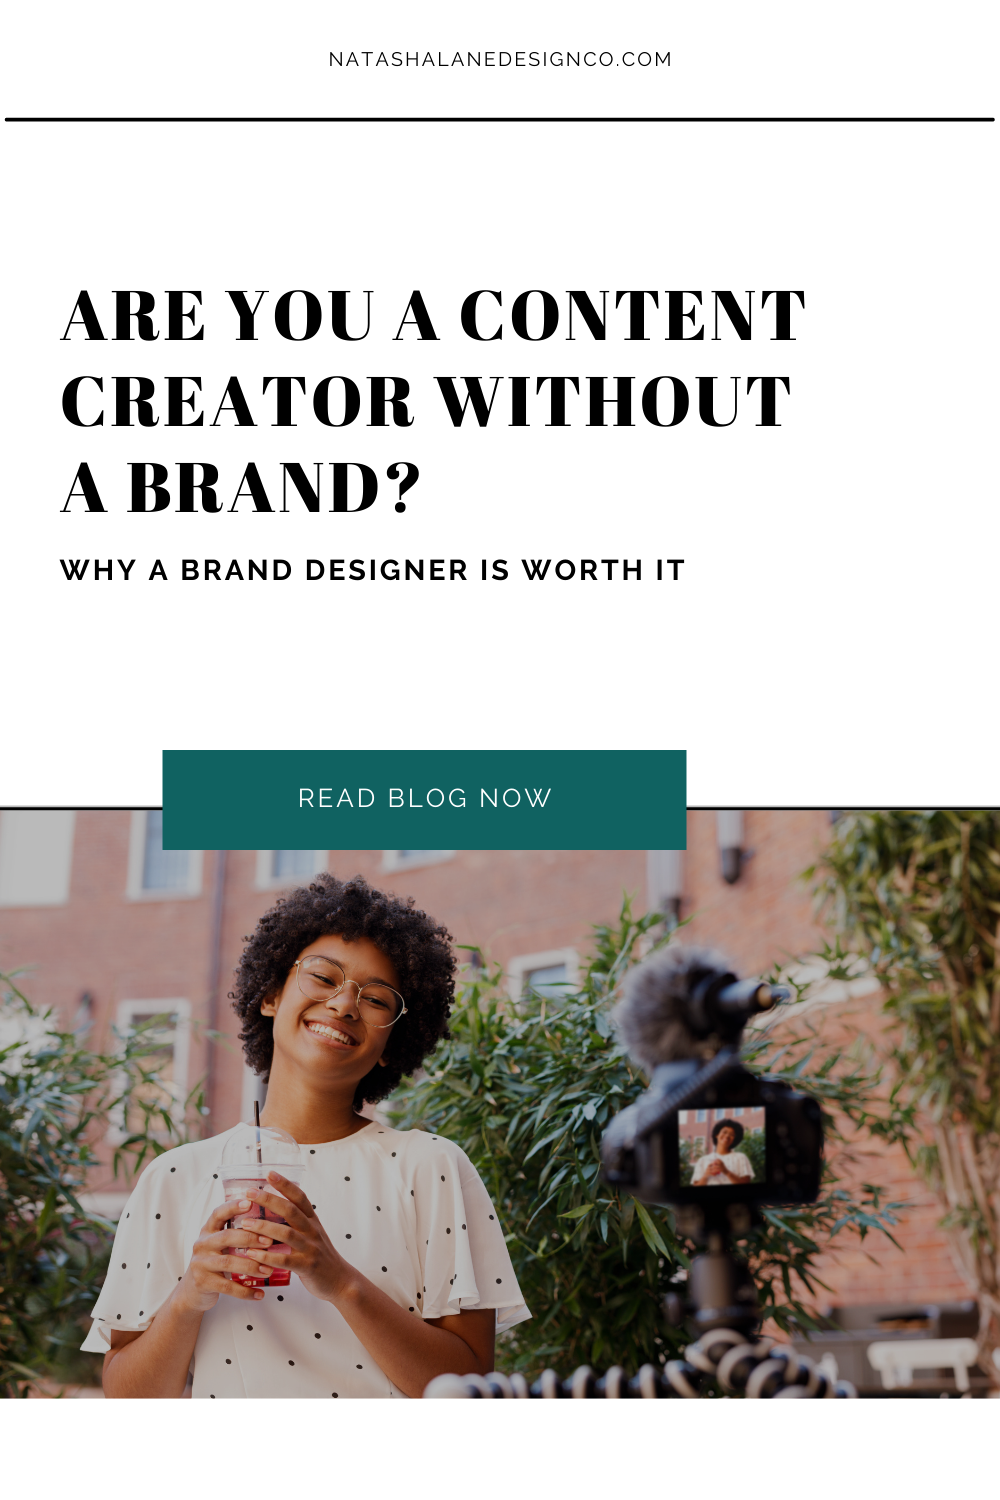 Why a brand designer is worth it